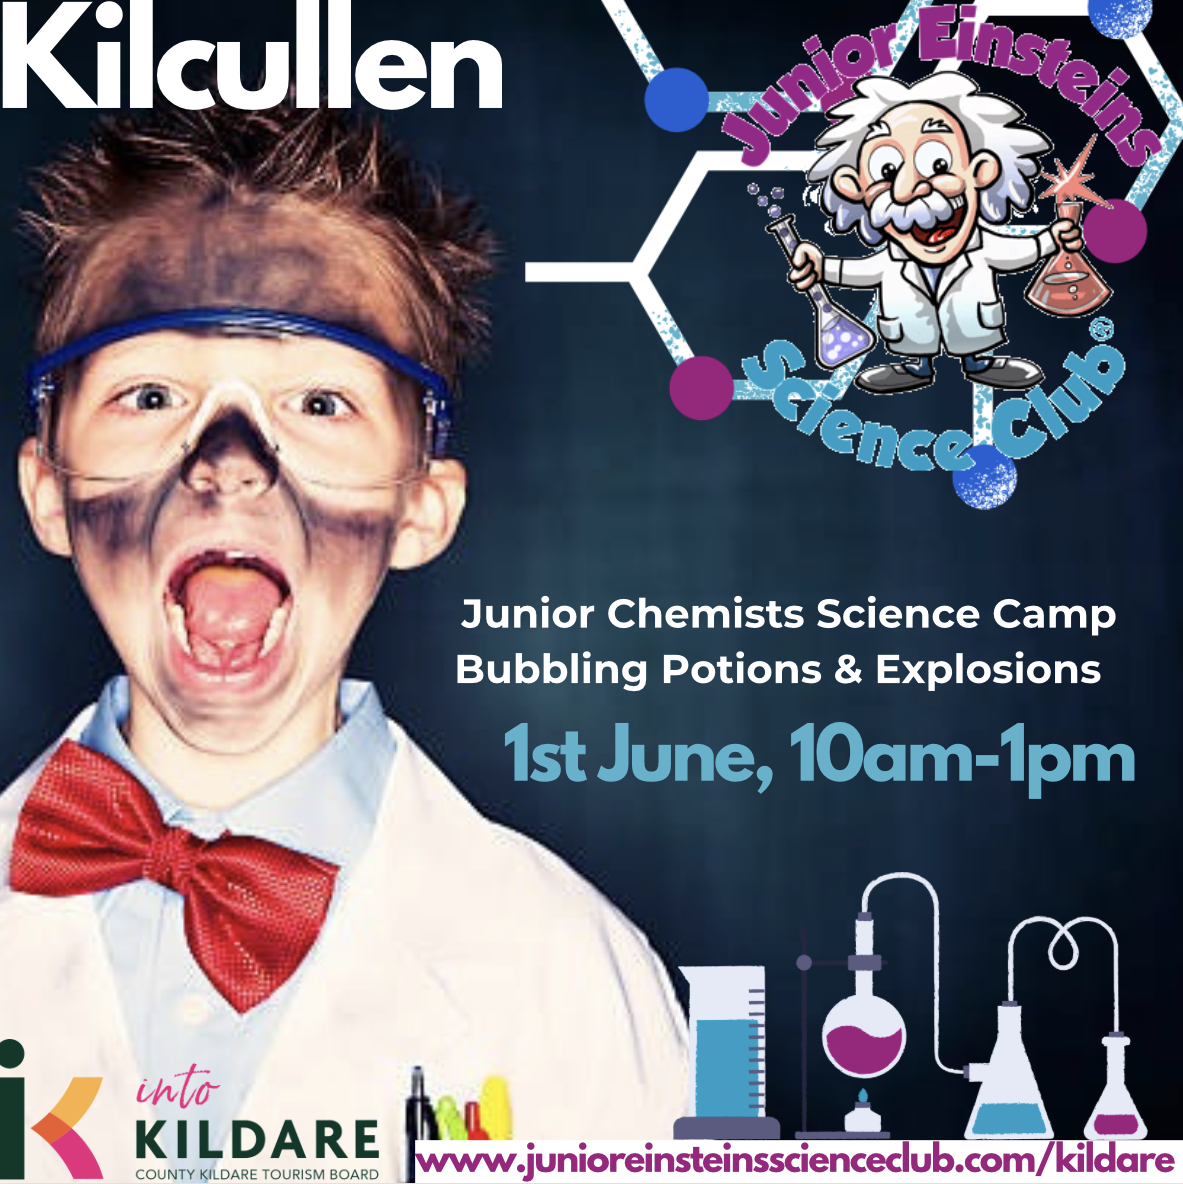 Kilcullen Kildare – Junior Chemists Camp for Kids : Bubbling Potions & Explosions!